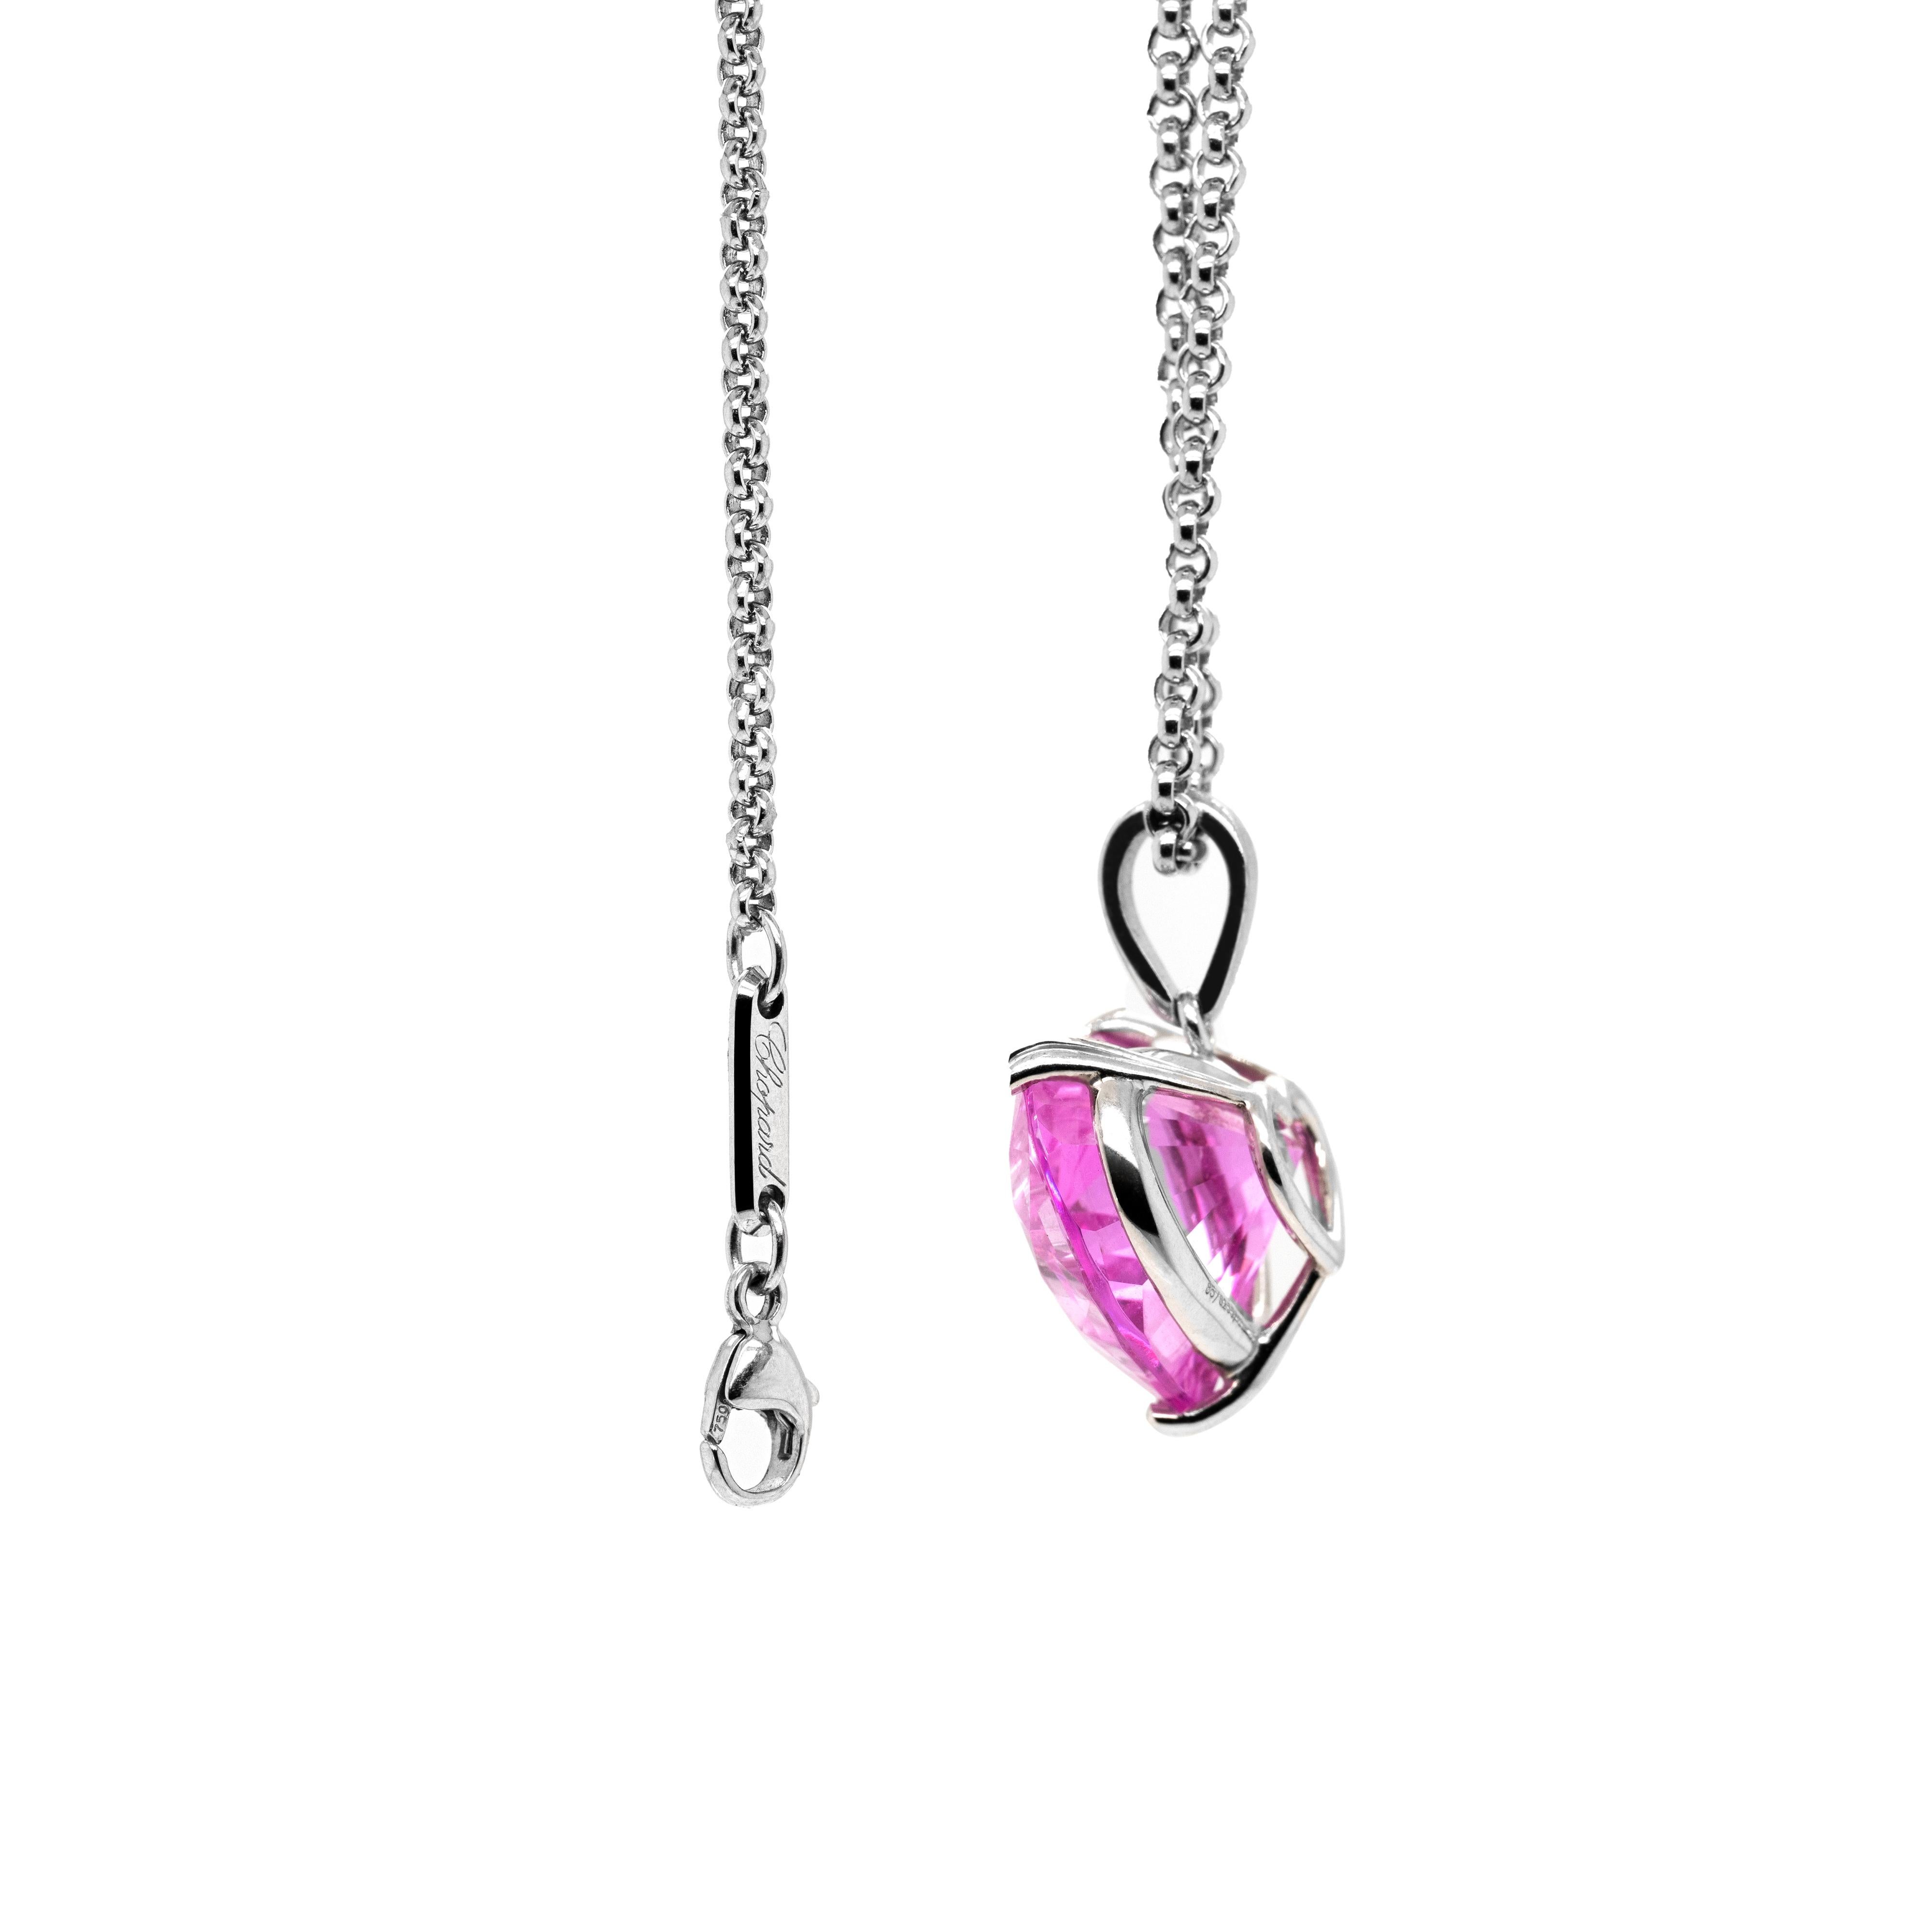 This gorgeous necklace by Chopard features a heart pendant made from a beautiful pink crystal encased with the brands' signature floating diamonds in the centre.  From the 'So Happy' collection, the three iconic floating diamonds are each